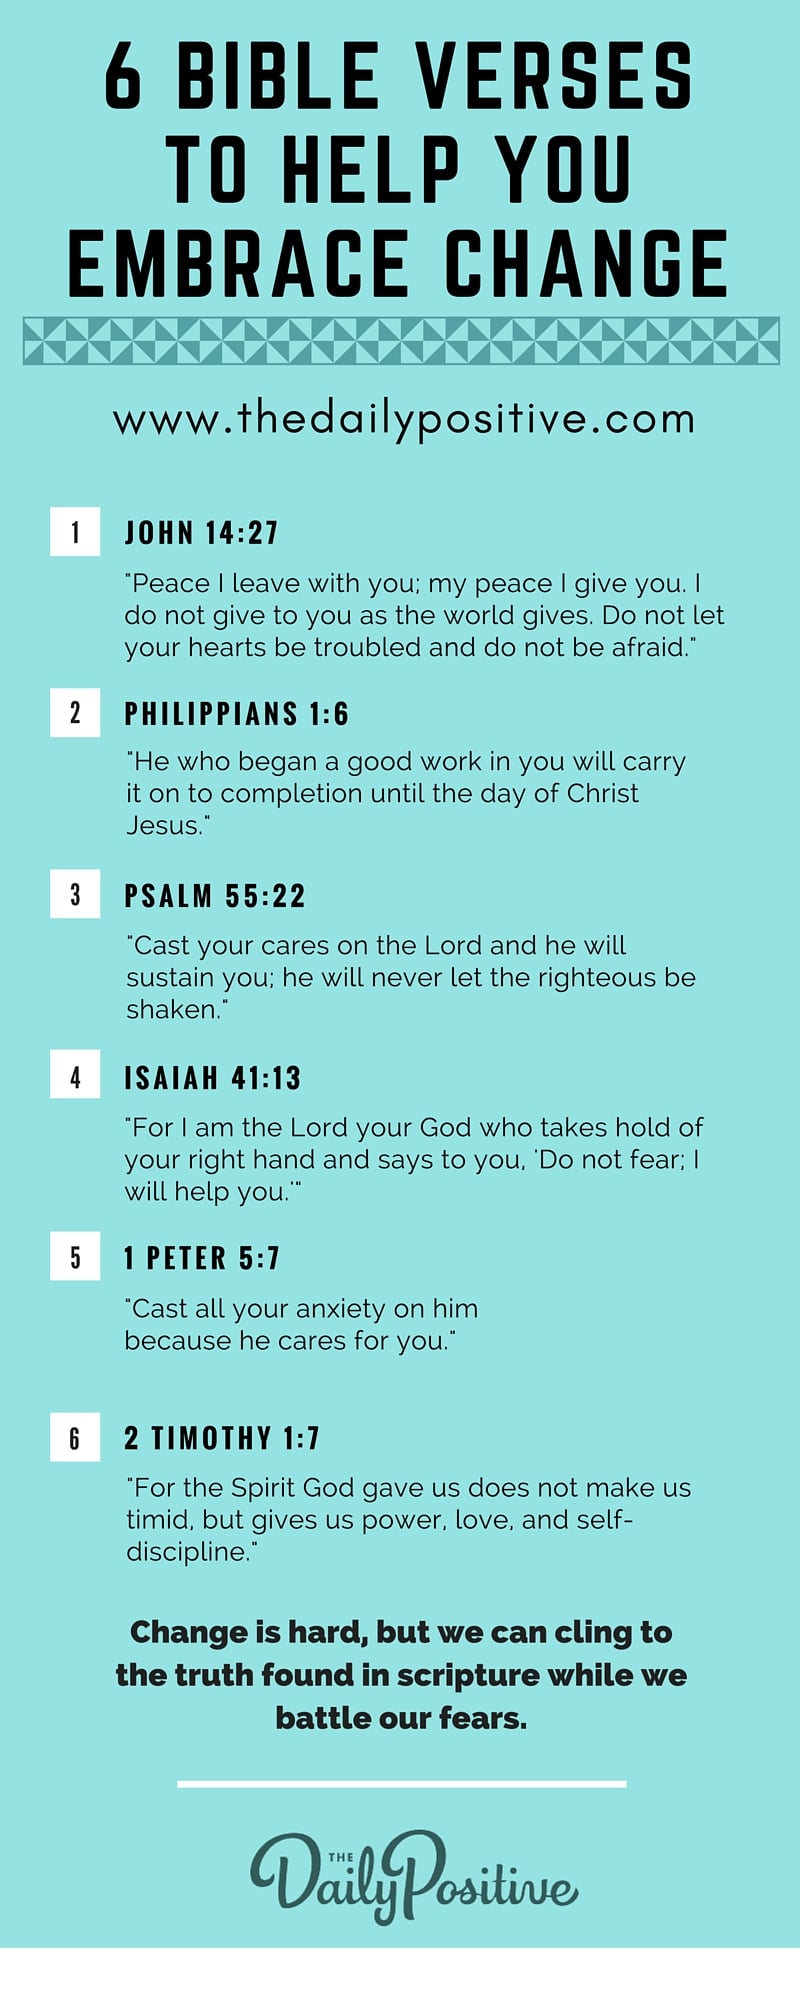 6 Bible verses for overcoming fear of change